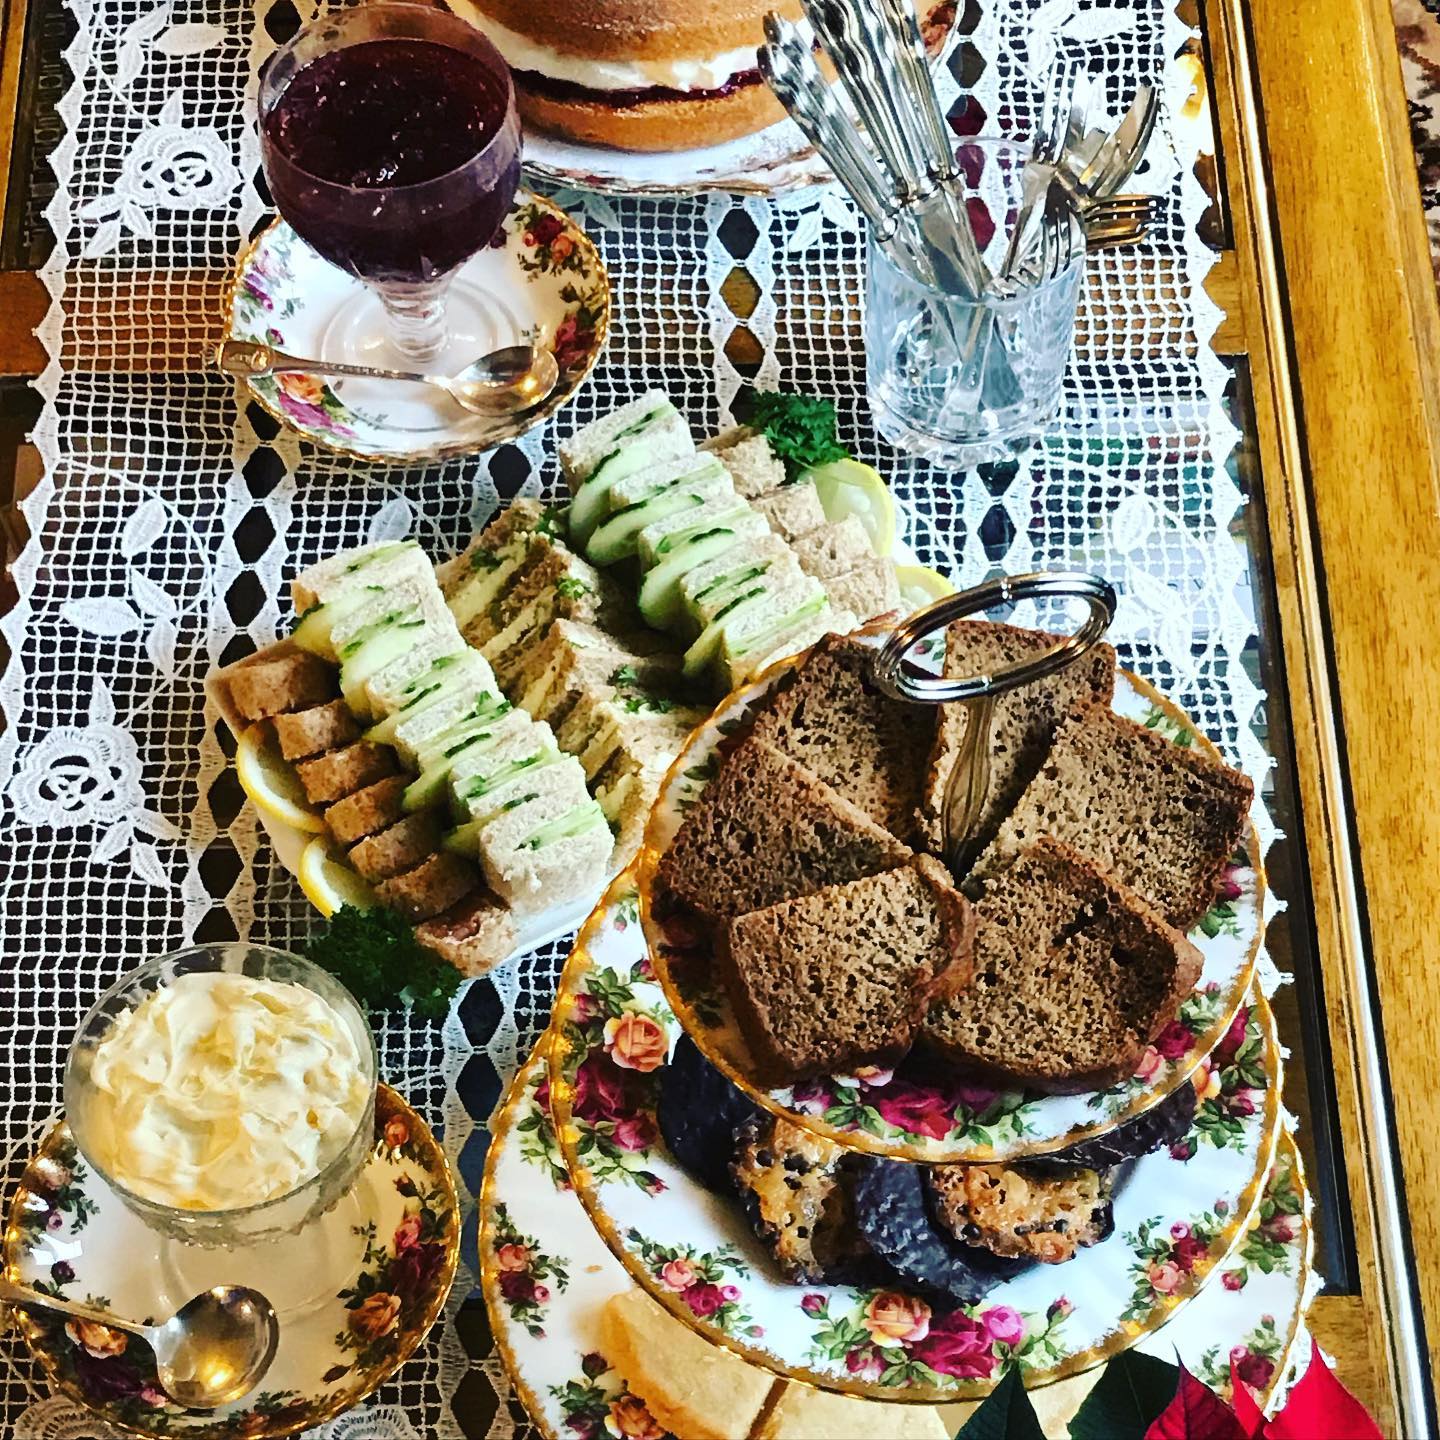 What a morning! A lesson about how to make a proper afternoon tea at wonderful mrs Giuliana Orme’s place. She’s a great teacher and a lovely host. #enturistilondon #afternoontealessons